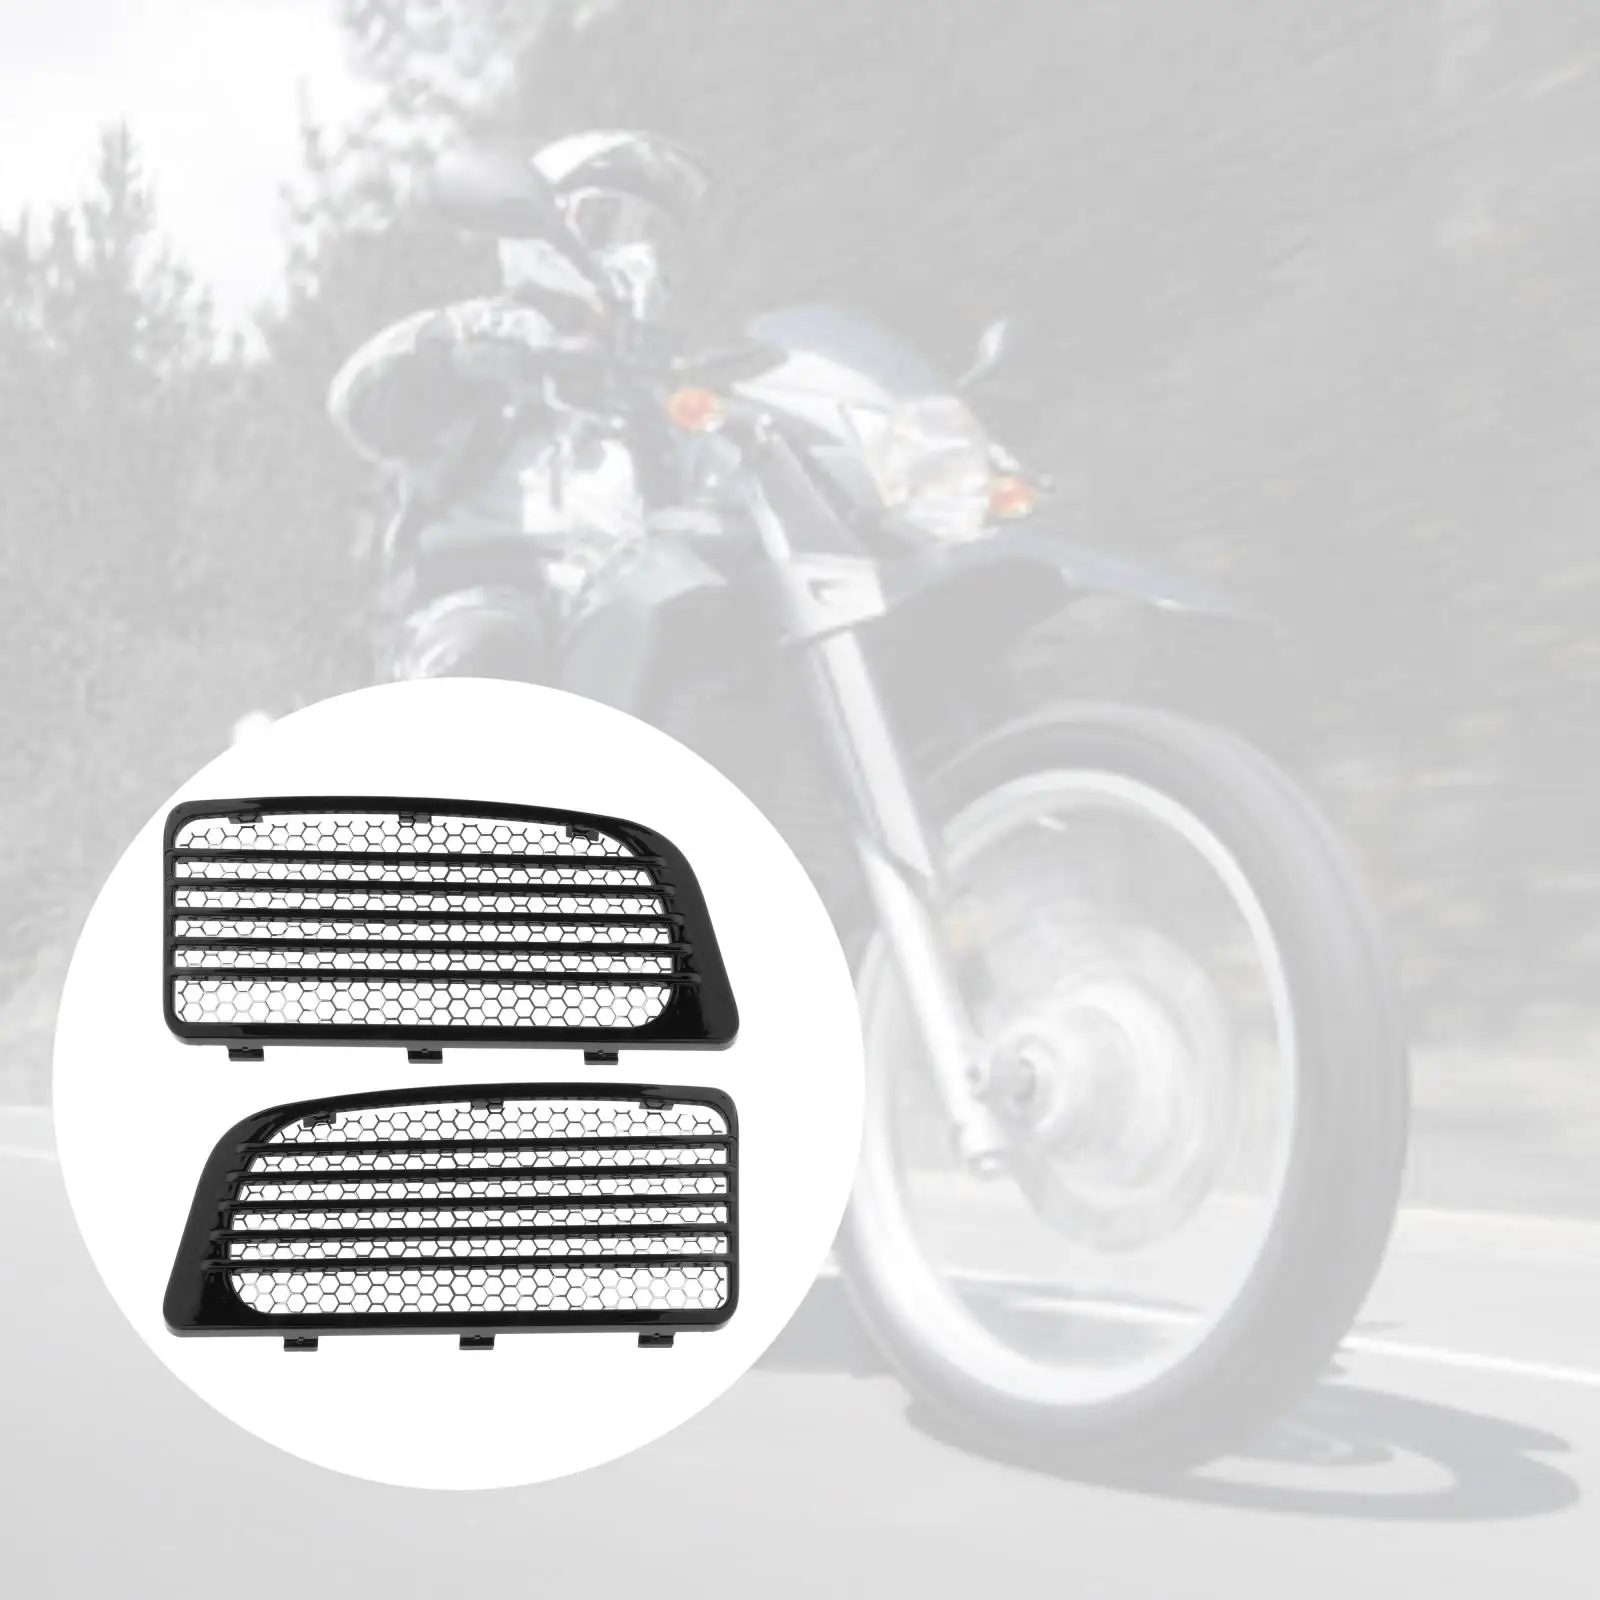 2pcs Motorcycle Radiator Grills w/ Metal Mesh Fit for Harley Touring Twin Cooled 14+ Accessories